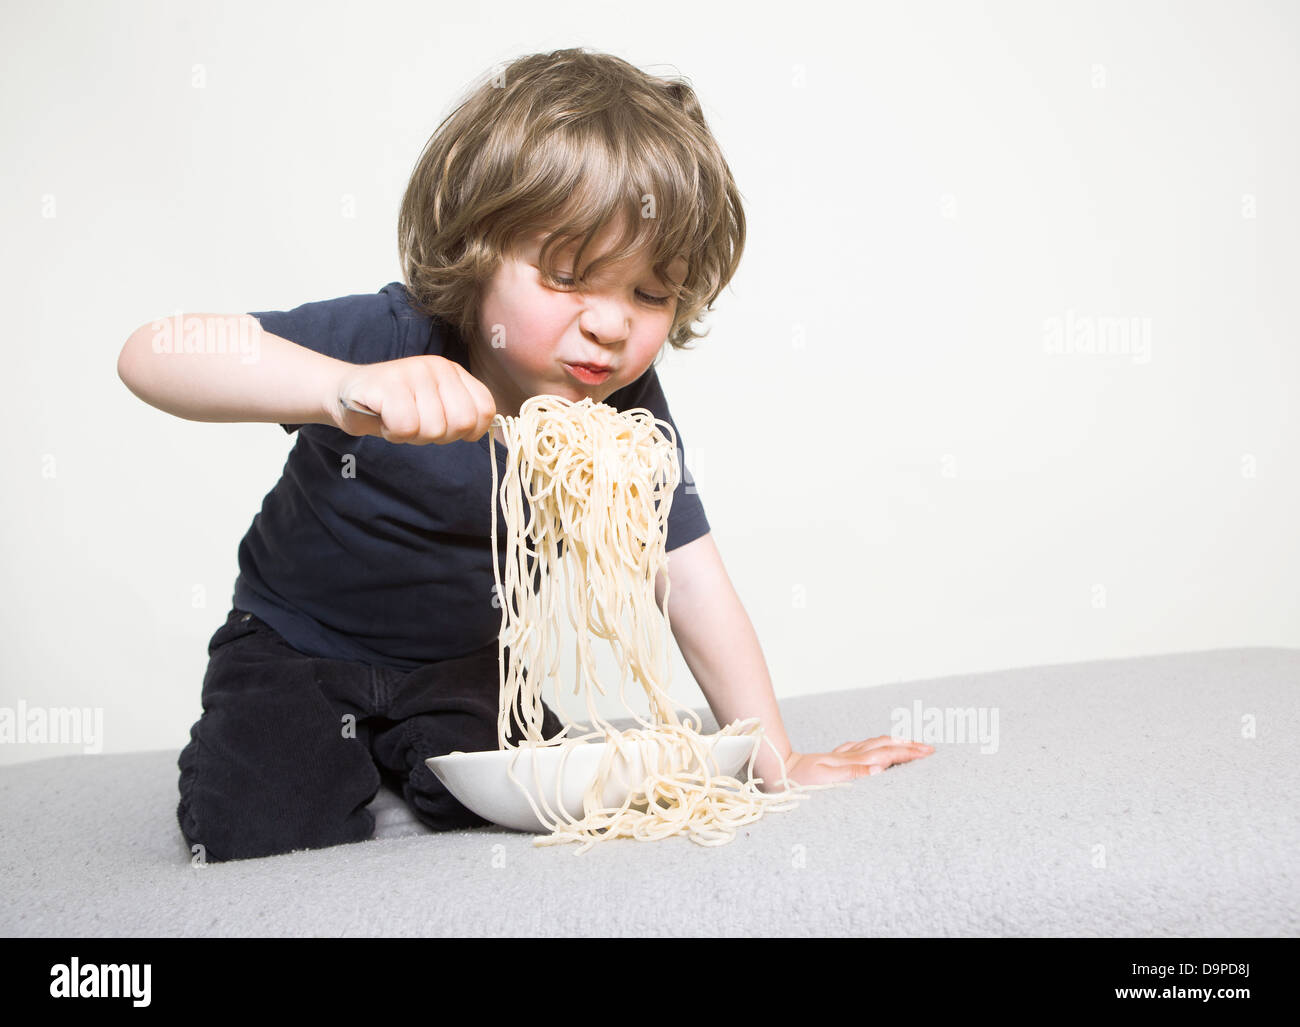 young boy eating his pasta on the couch Stock Photo